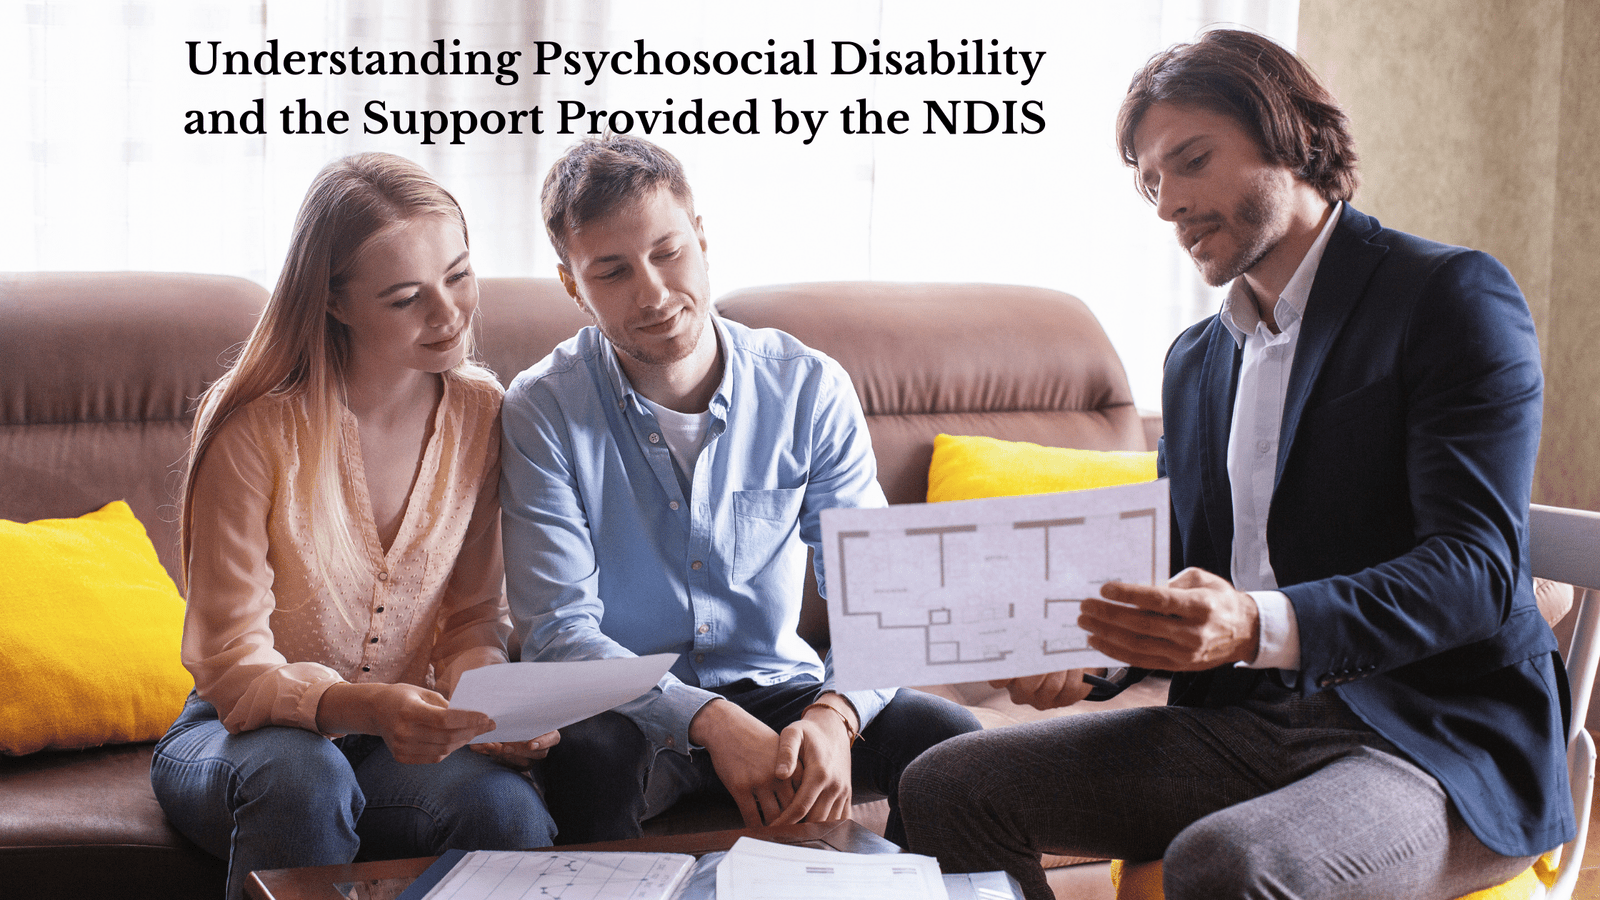 Understanding Psychosocial Disability and the Support Provided by the NDIS